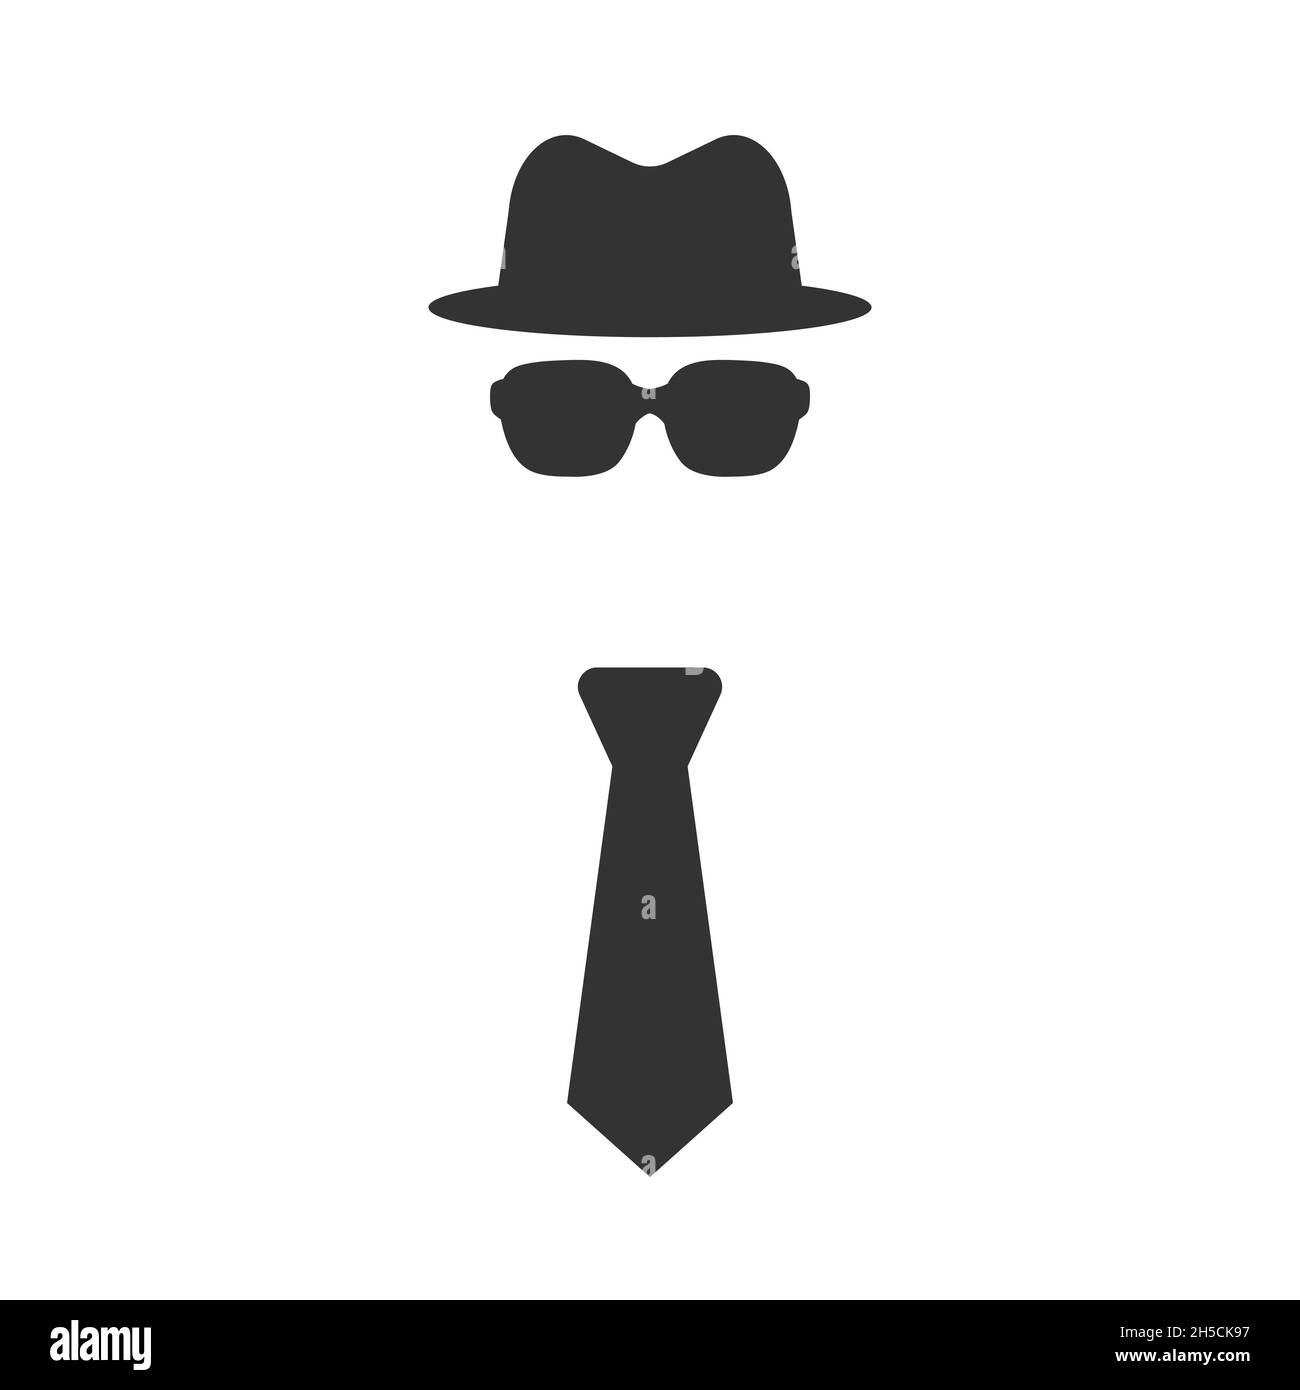 Spy icon, special agent hat glasses and tie. Man in hat, Stock vector illustration isolated Stock Vector